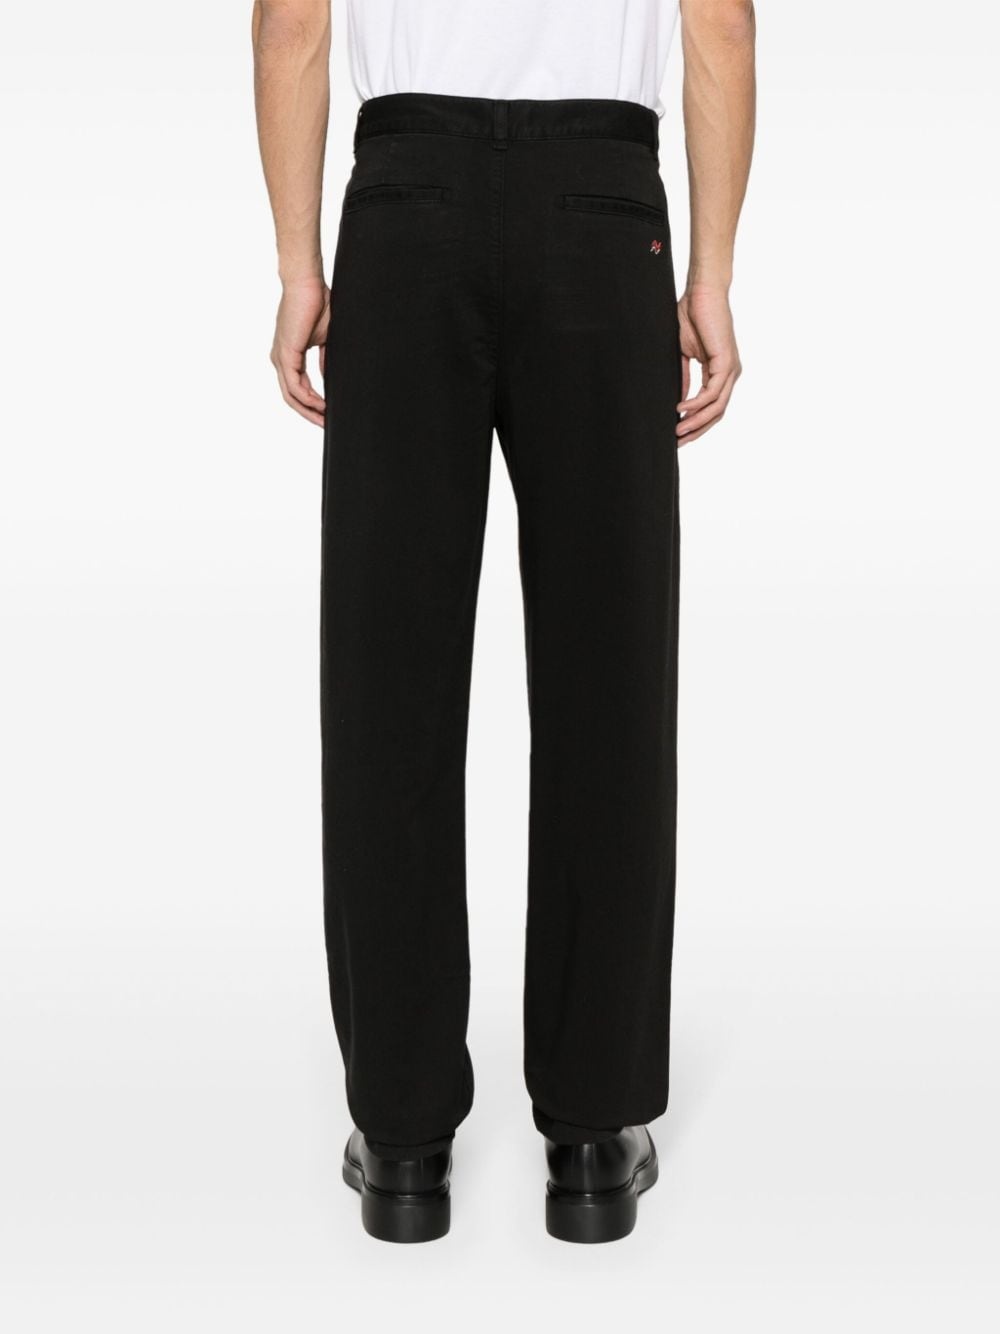 embroidered-motif chino trousers - 4